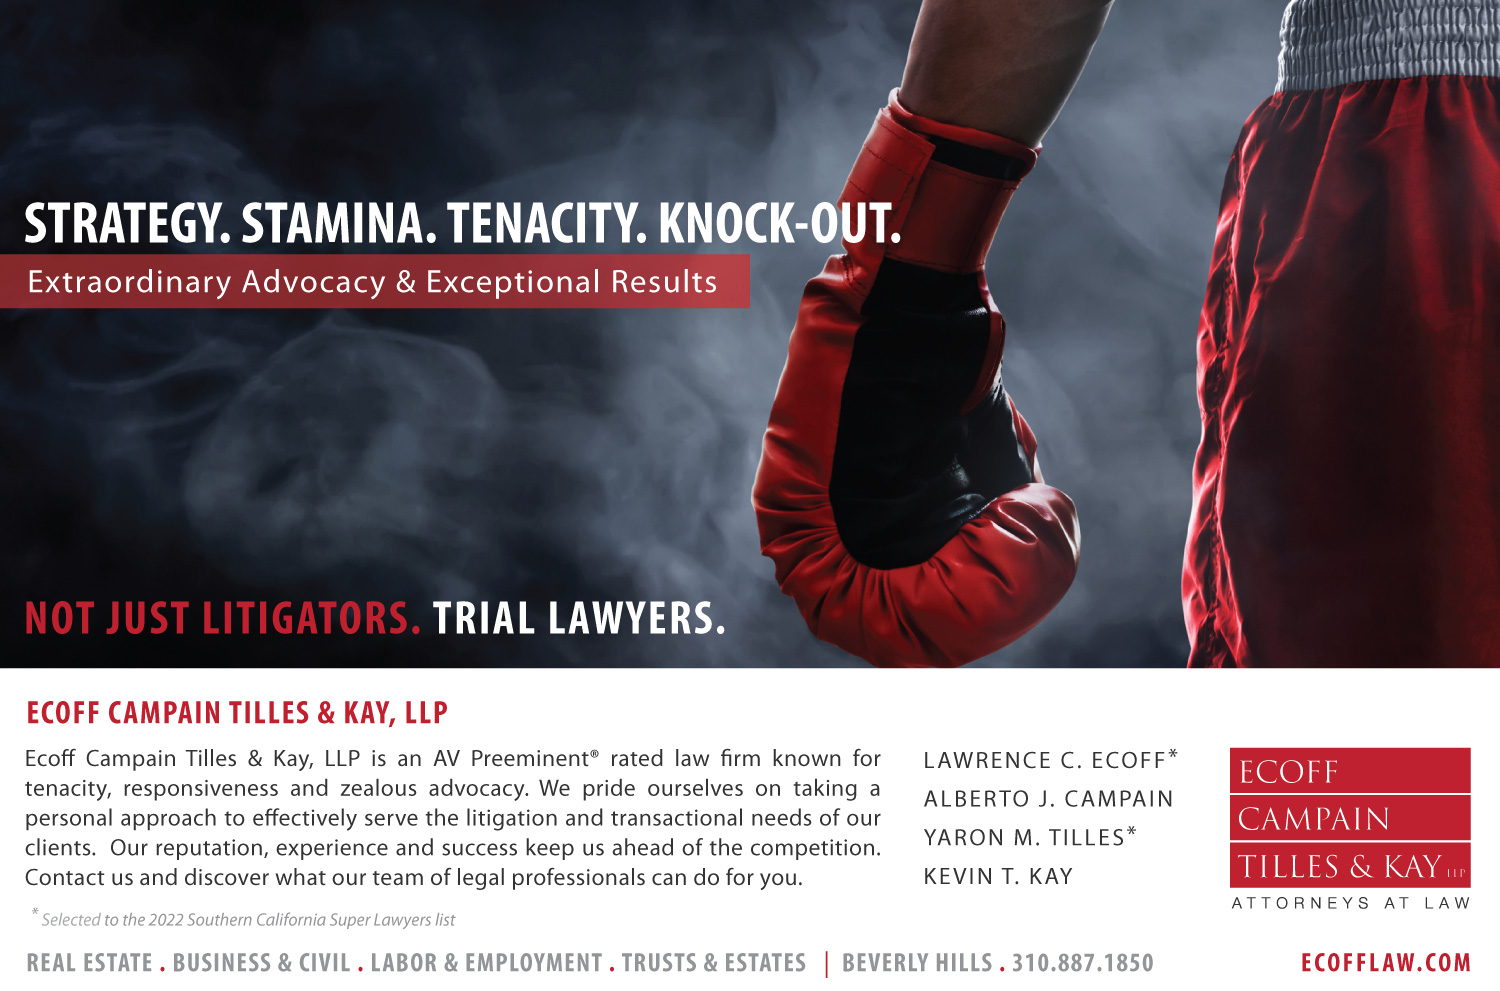 2022 Super Lawyers Ad for Ecoff Campain Tilles & Kay, LLP